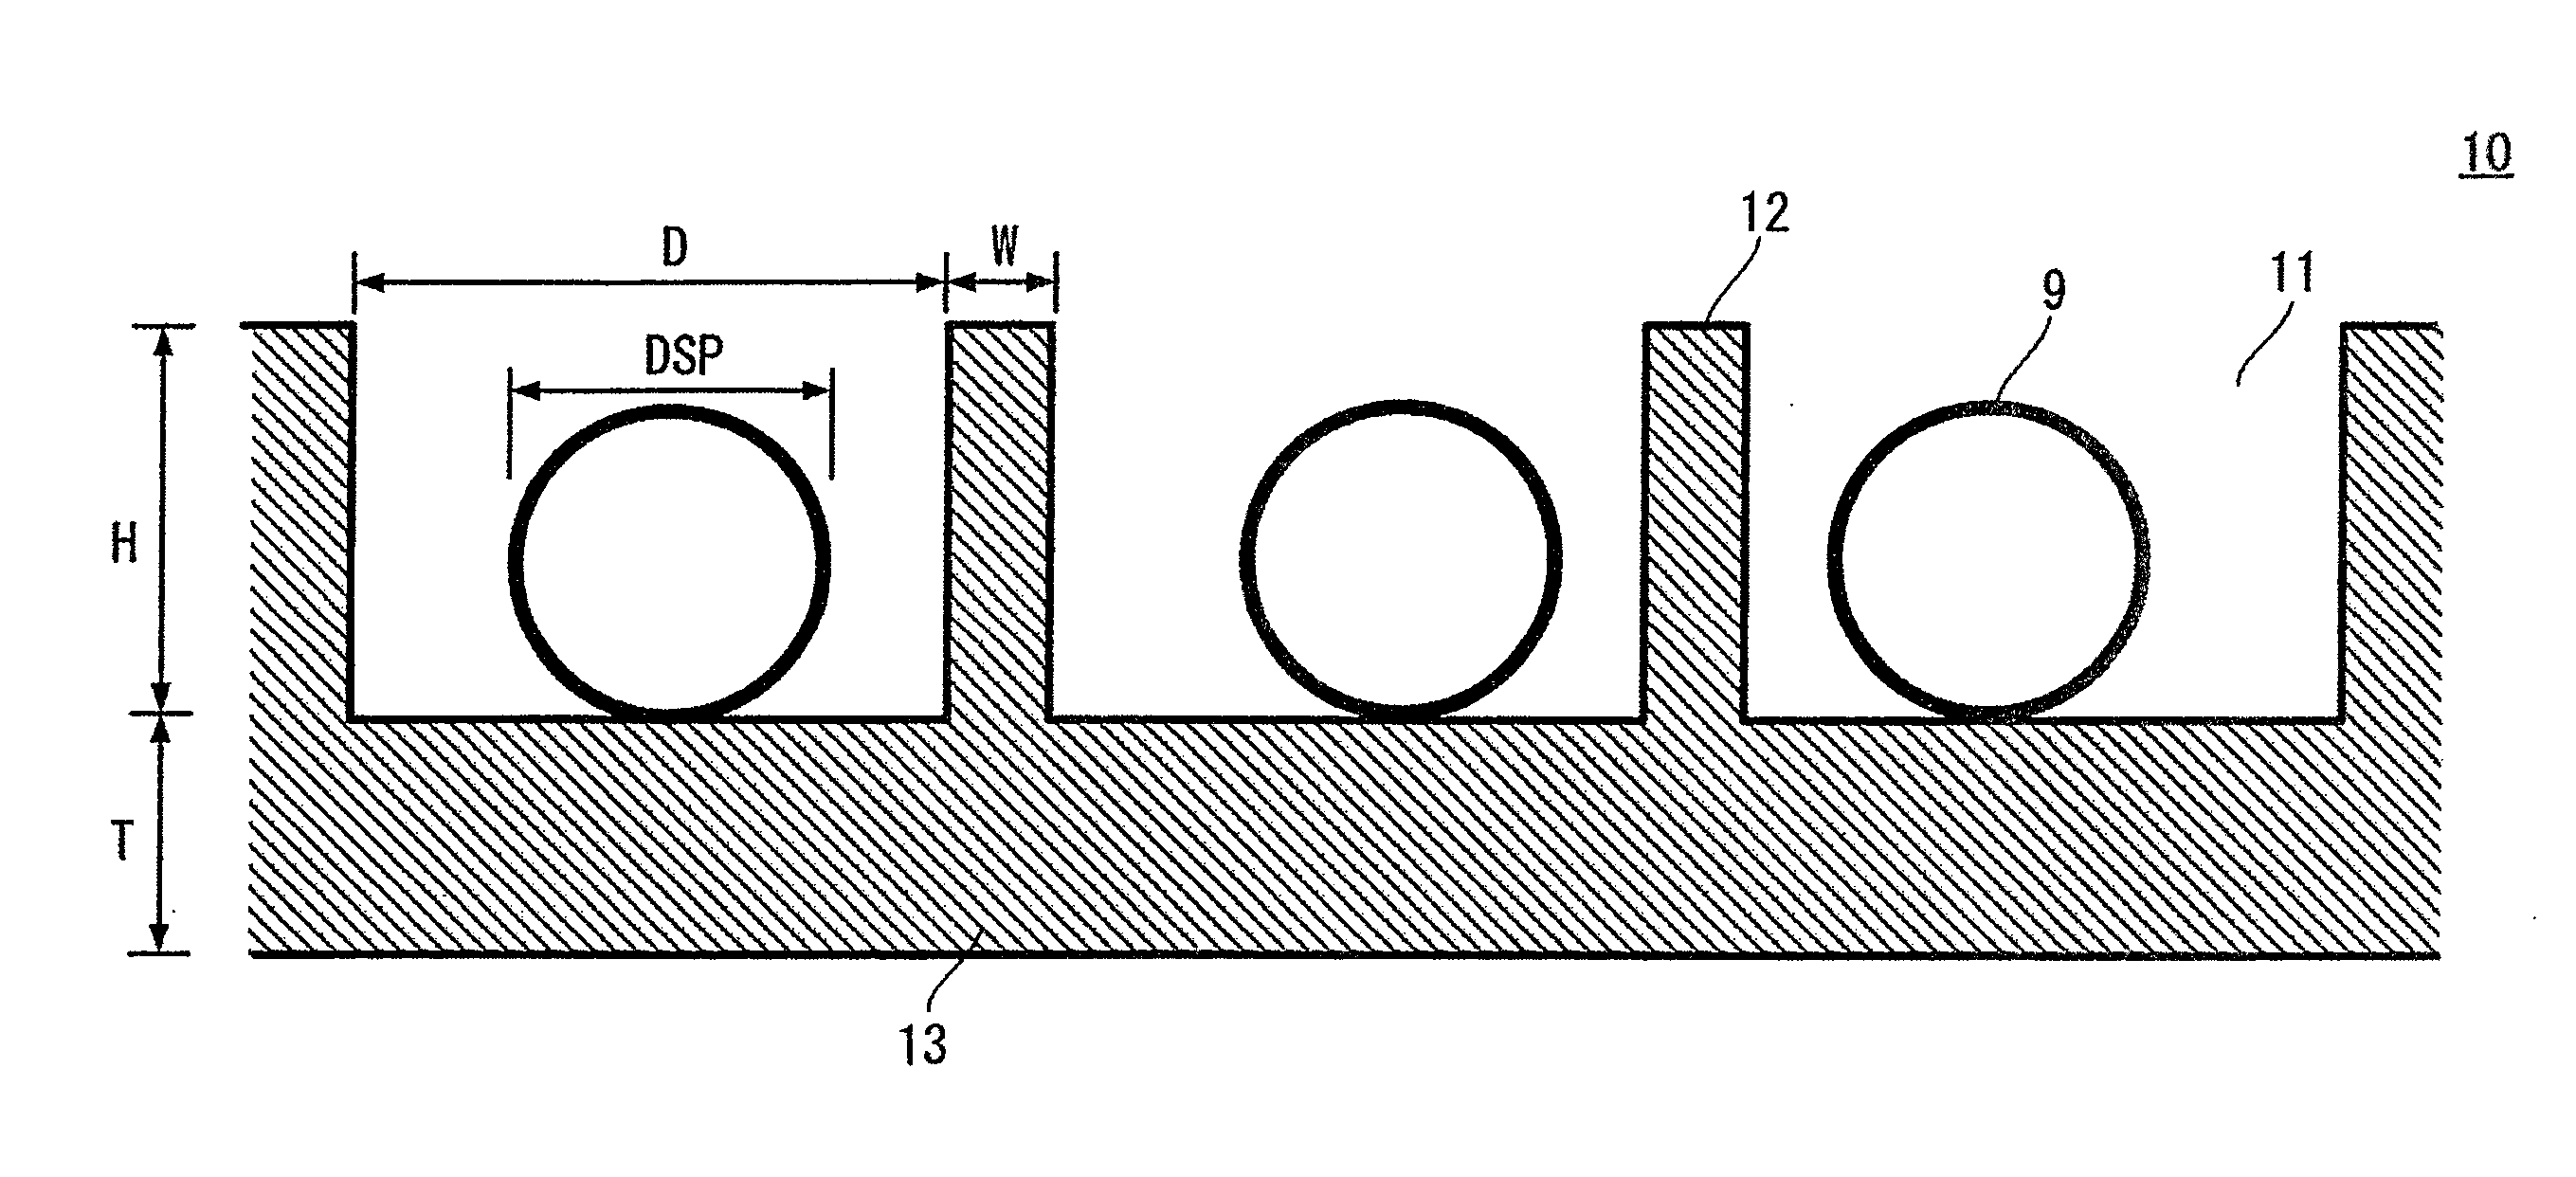 Adherent cell culture method